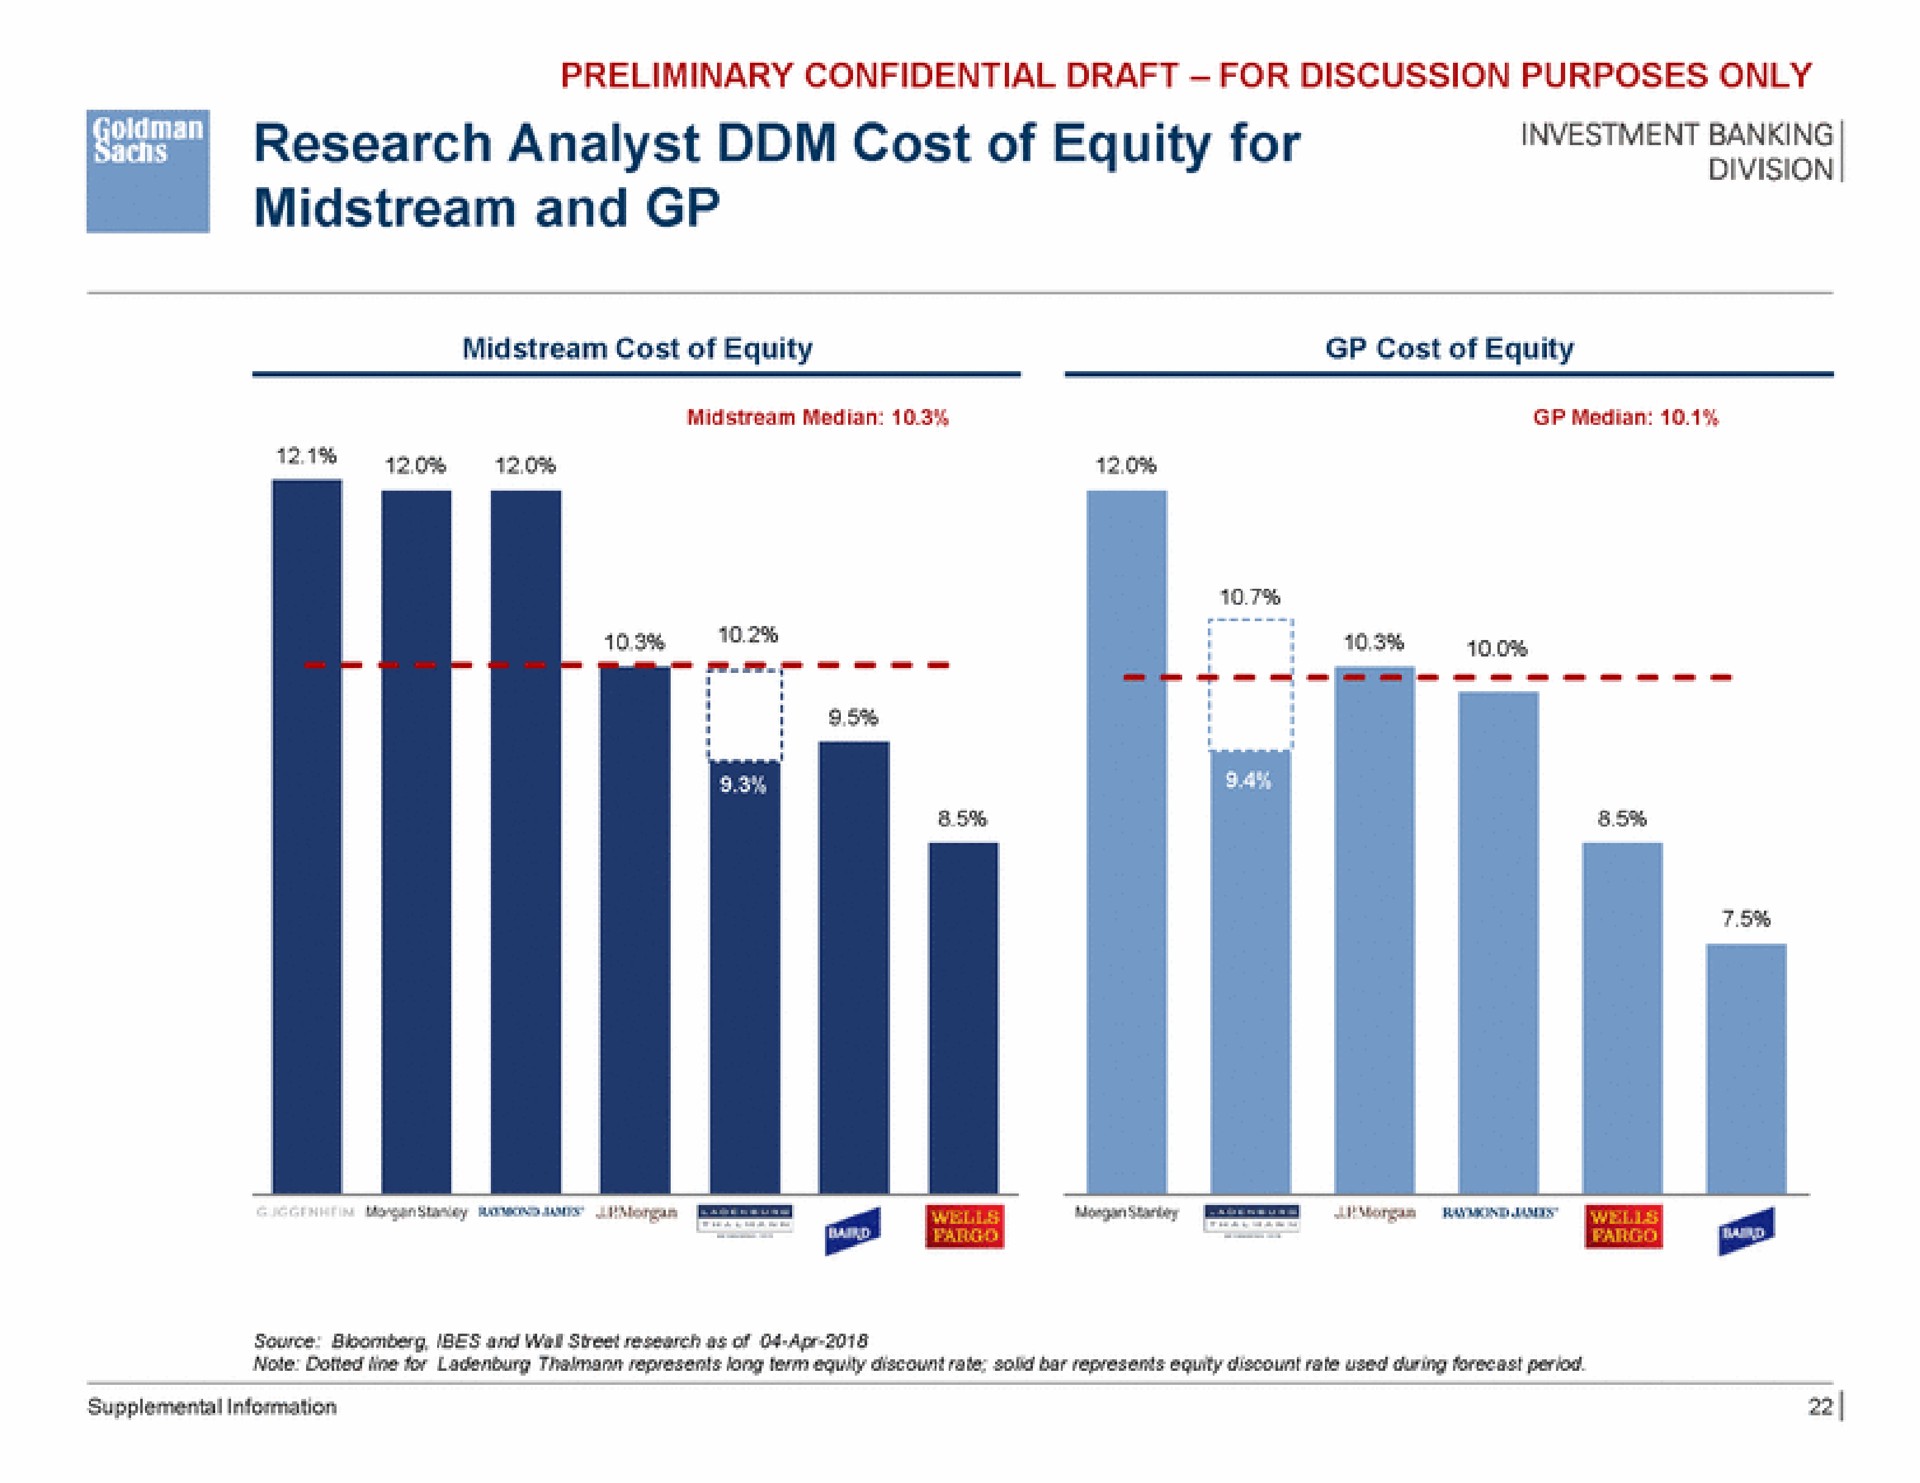 roi research analyst cost of equity for midstream and | Goldman Sachs